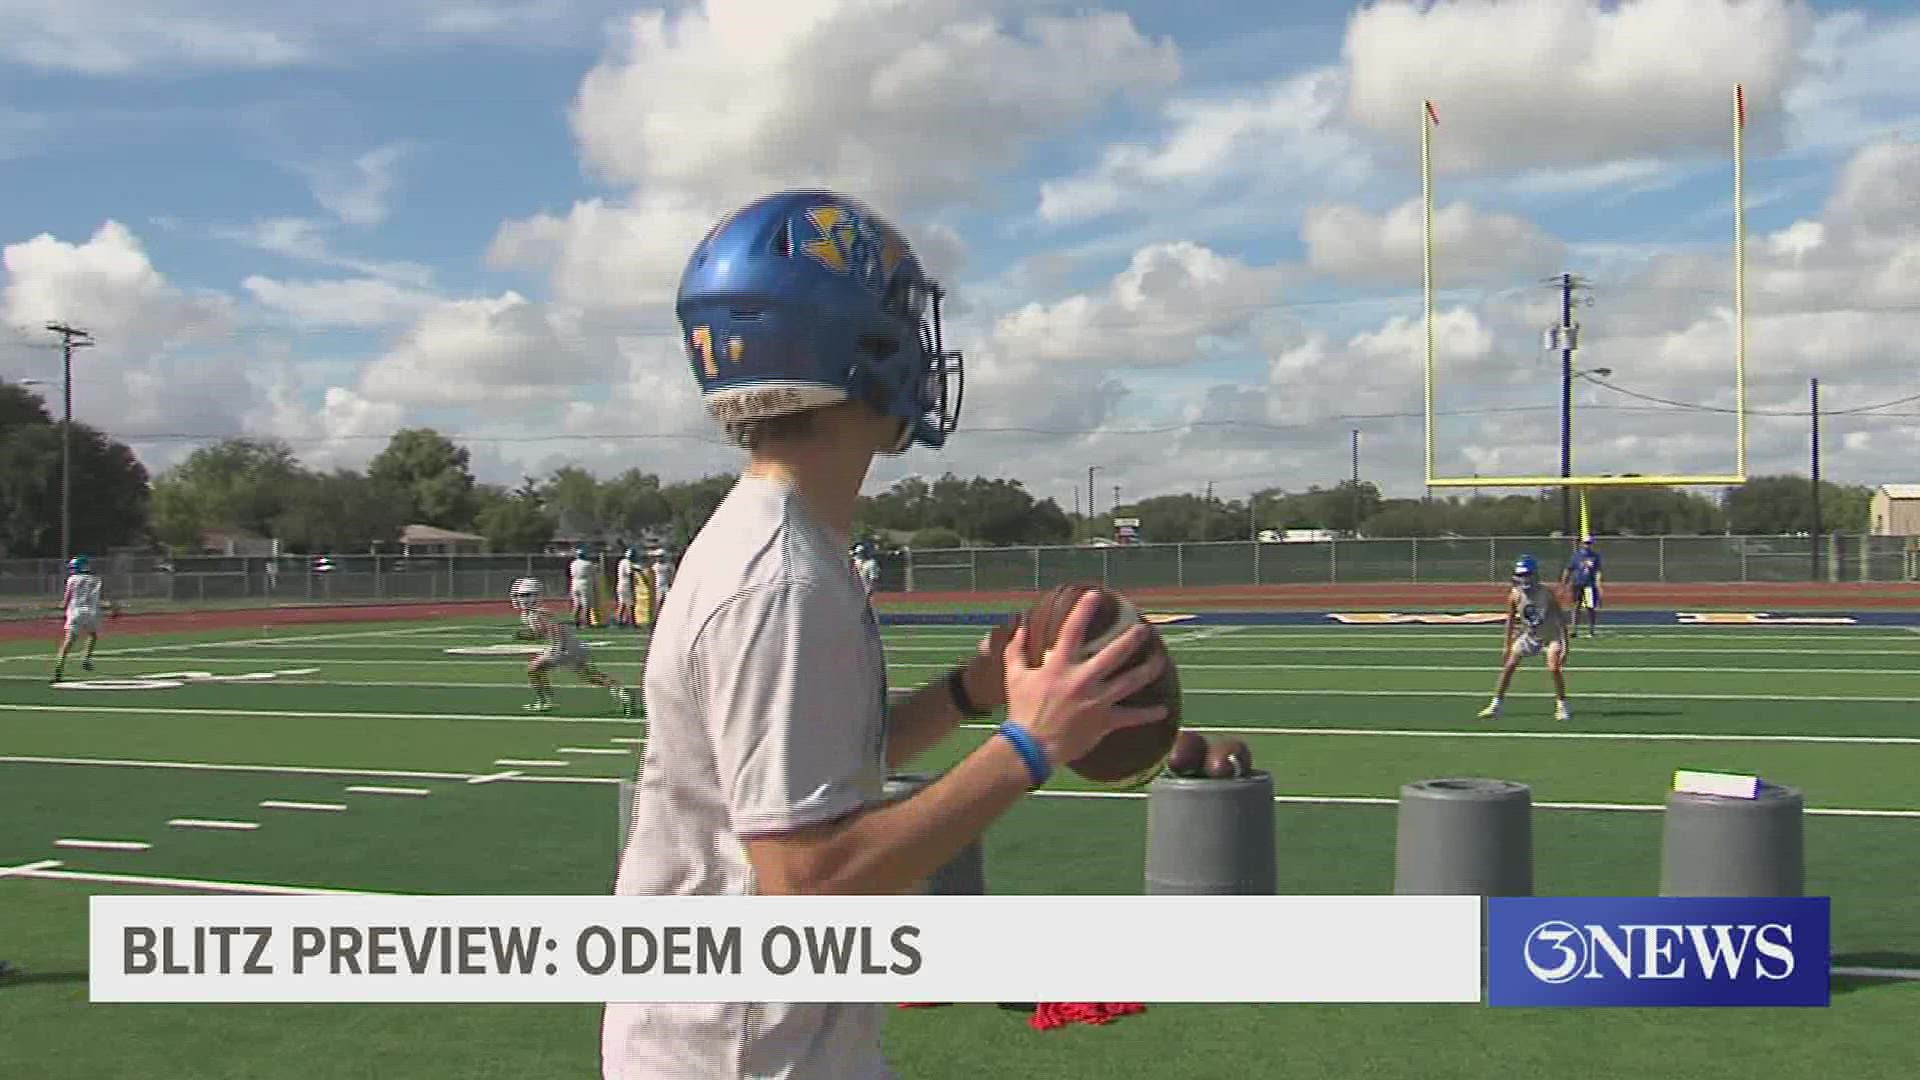 The Owls have an upper classmen-heavy team, but one largely lacking in starting experience.